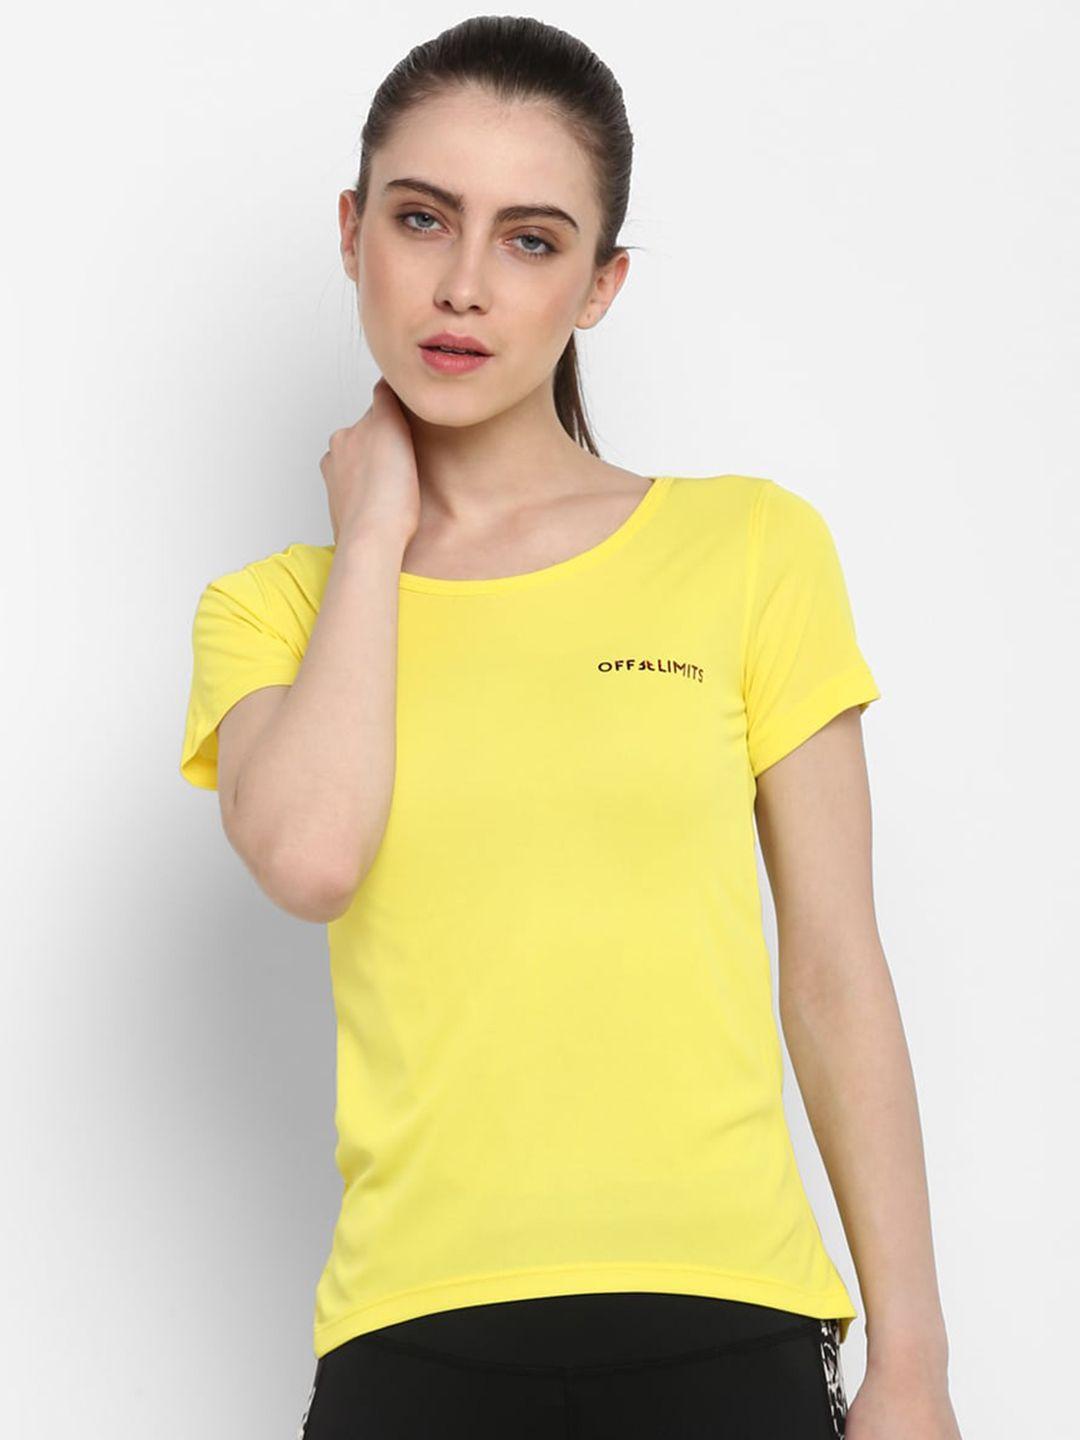 off-limits-women-yellow-antimicrobial-pockets-t-shirt